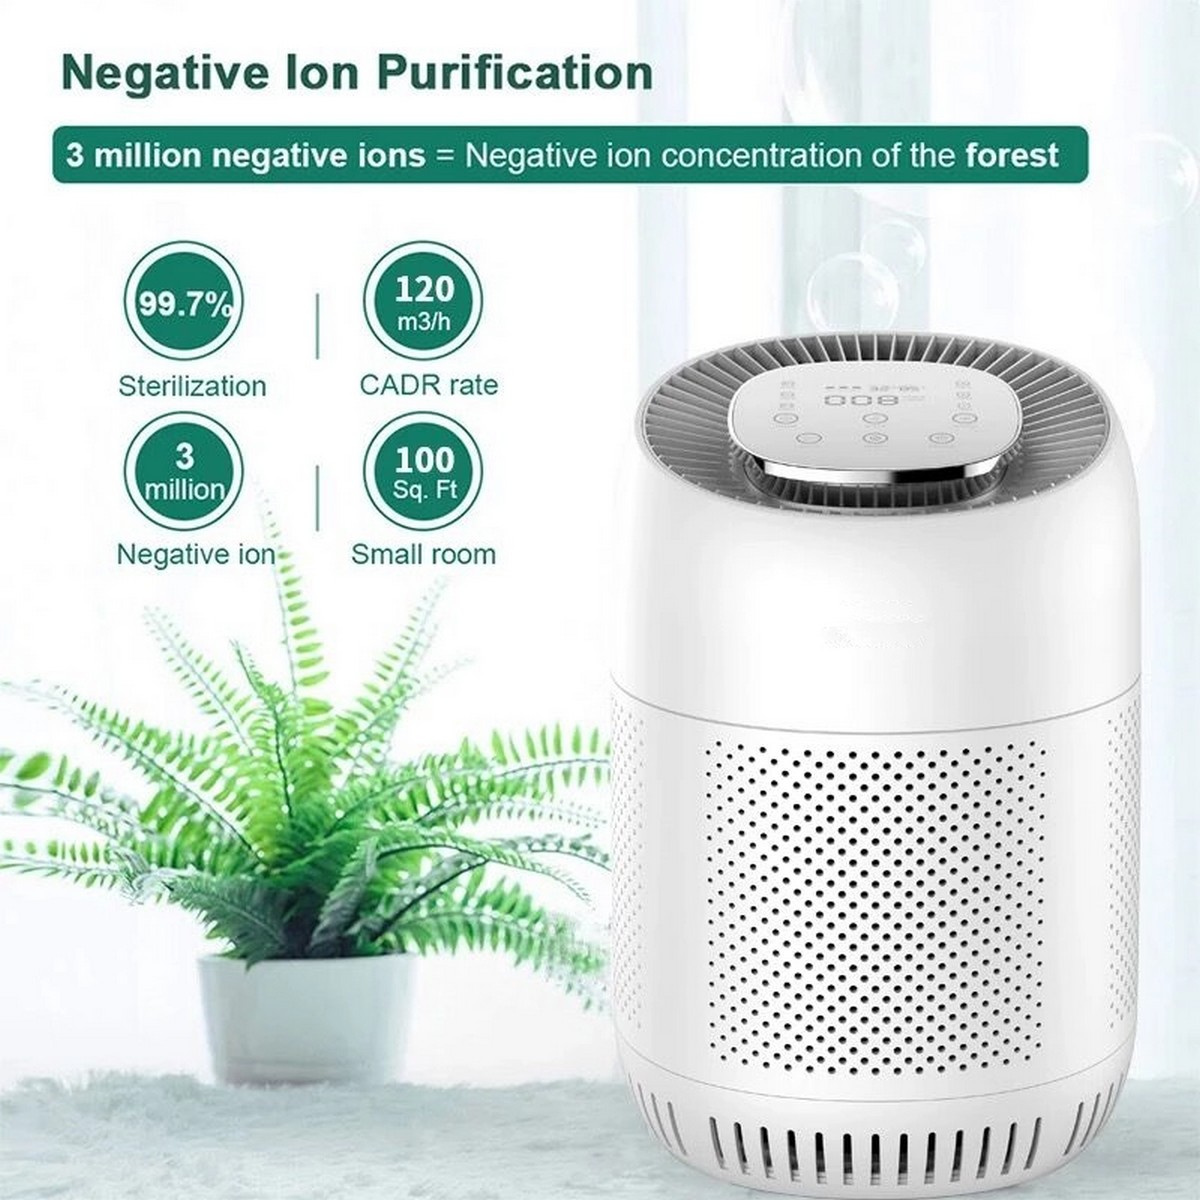 ionizer cleaner features and functions